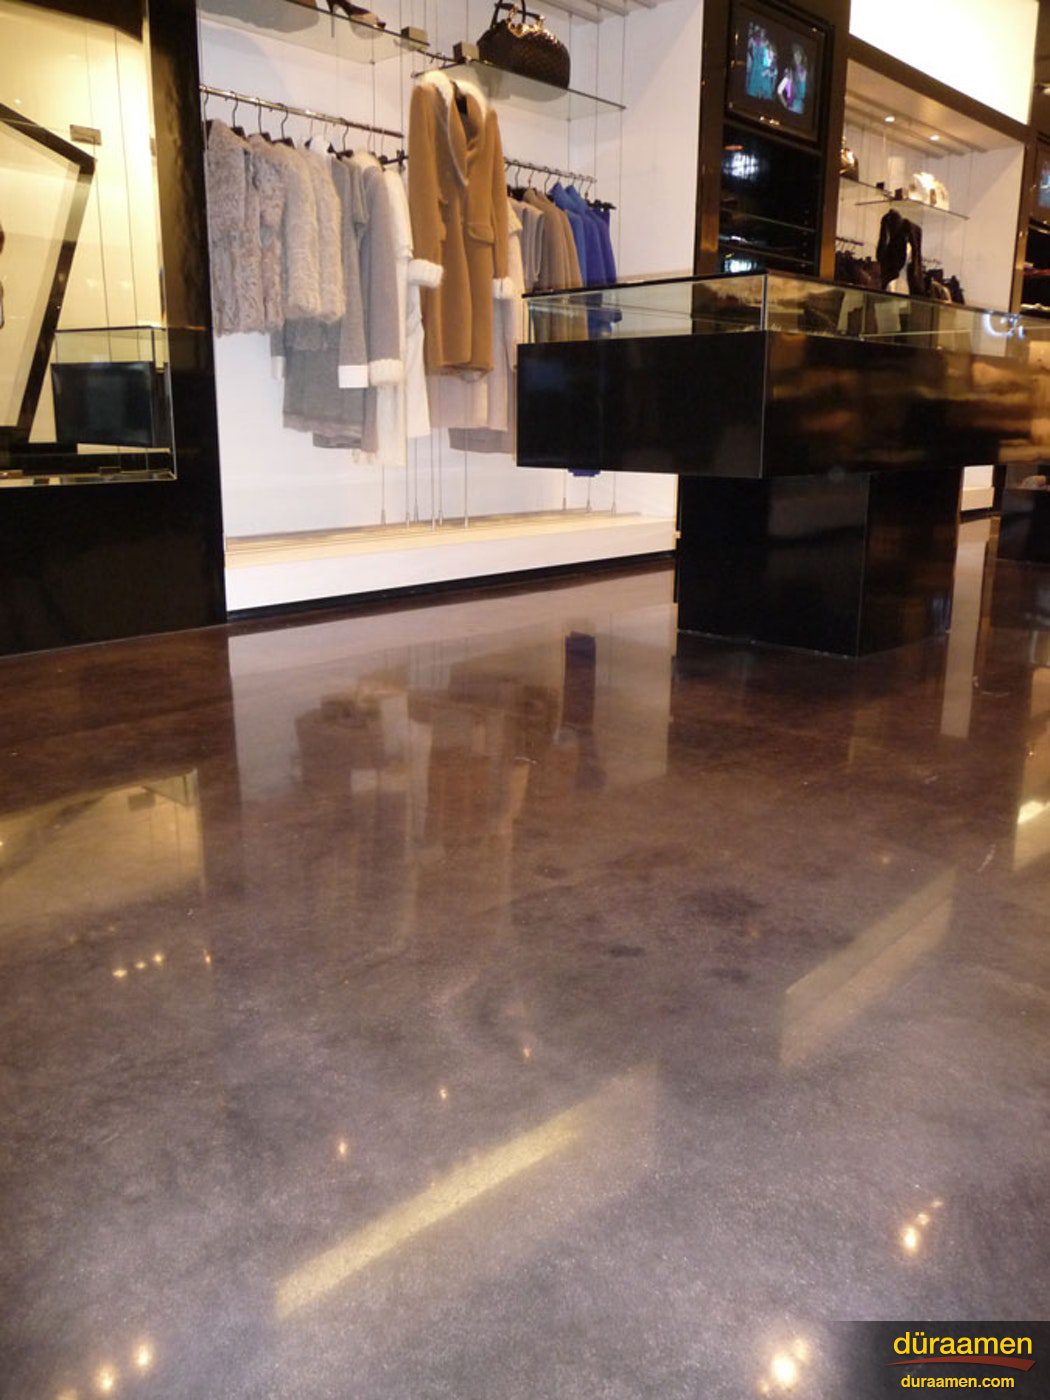 Retailers such as this clothing store appreciate the super high gloss shine polished concrete offers Polished Concrete Floor in a Clothing Store Englewood NJ | Duraamen Engineered Products Inc